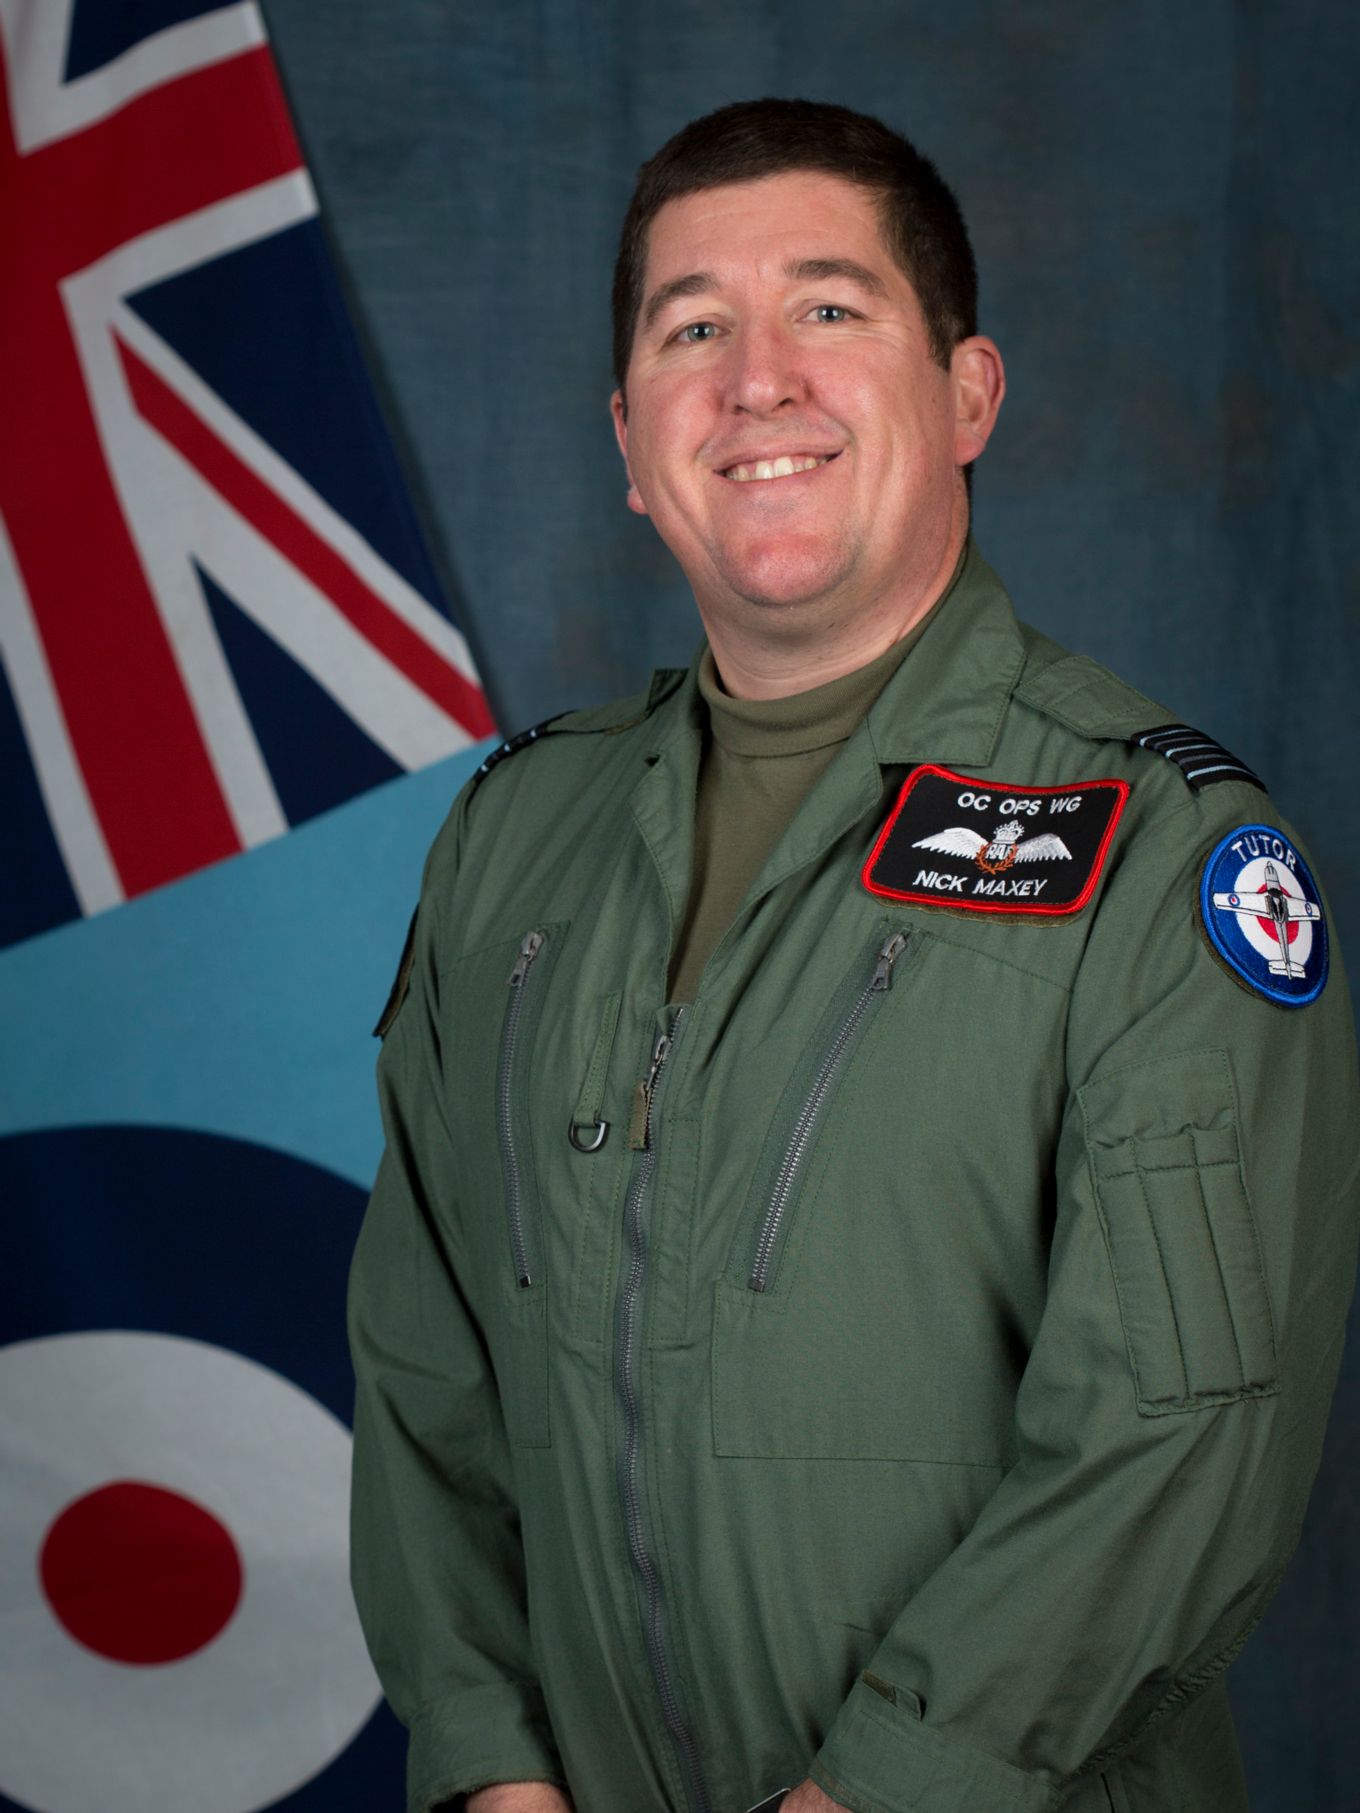 Wing Commander Nick Maxey